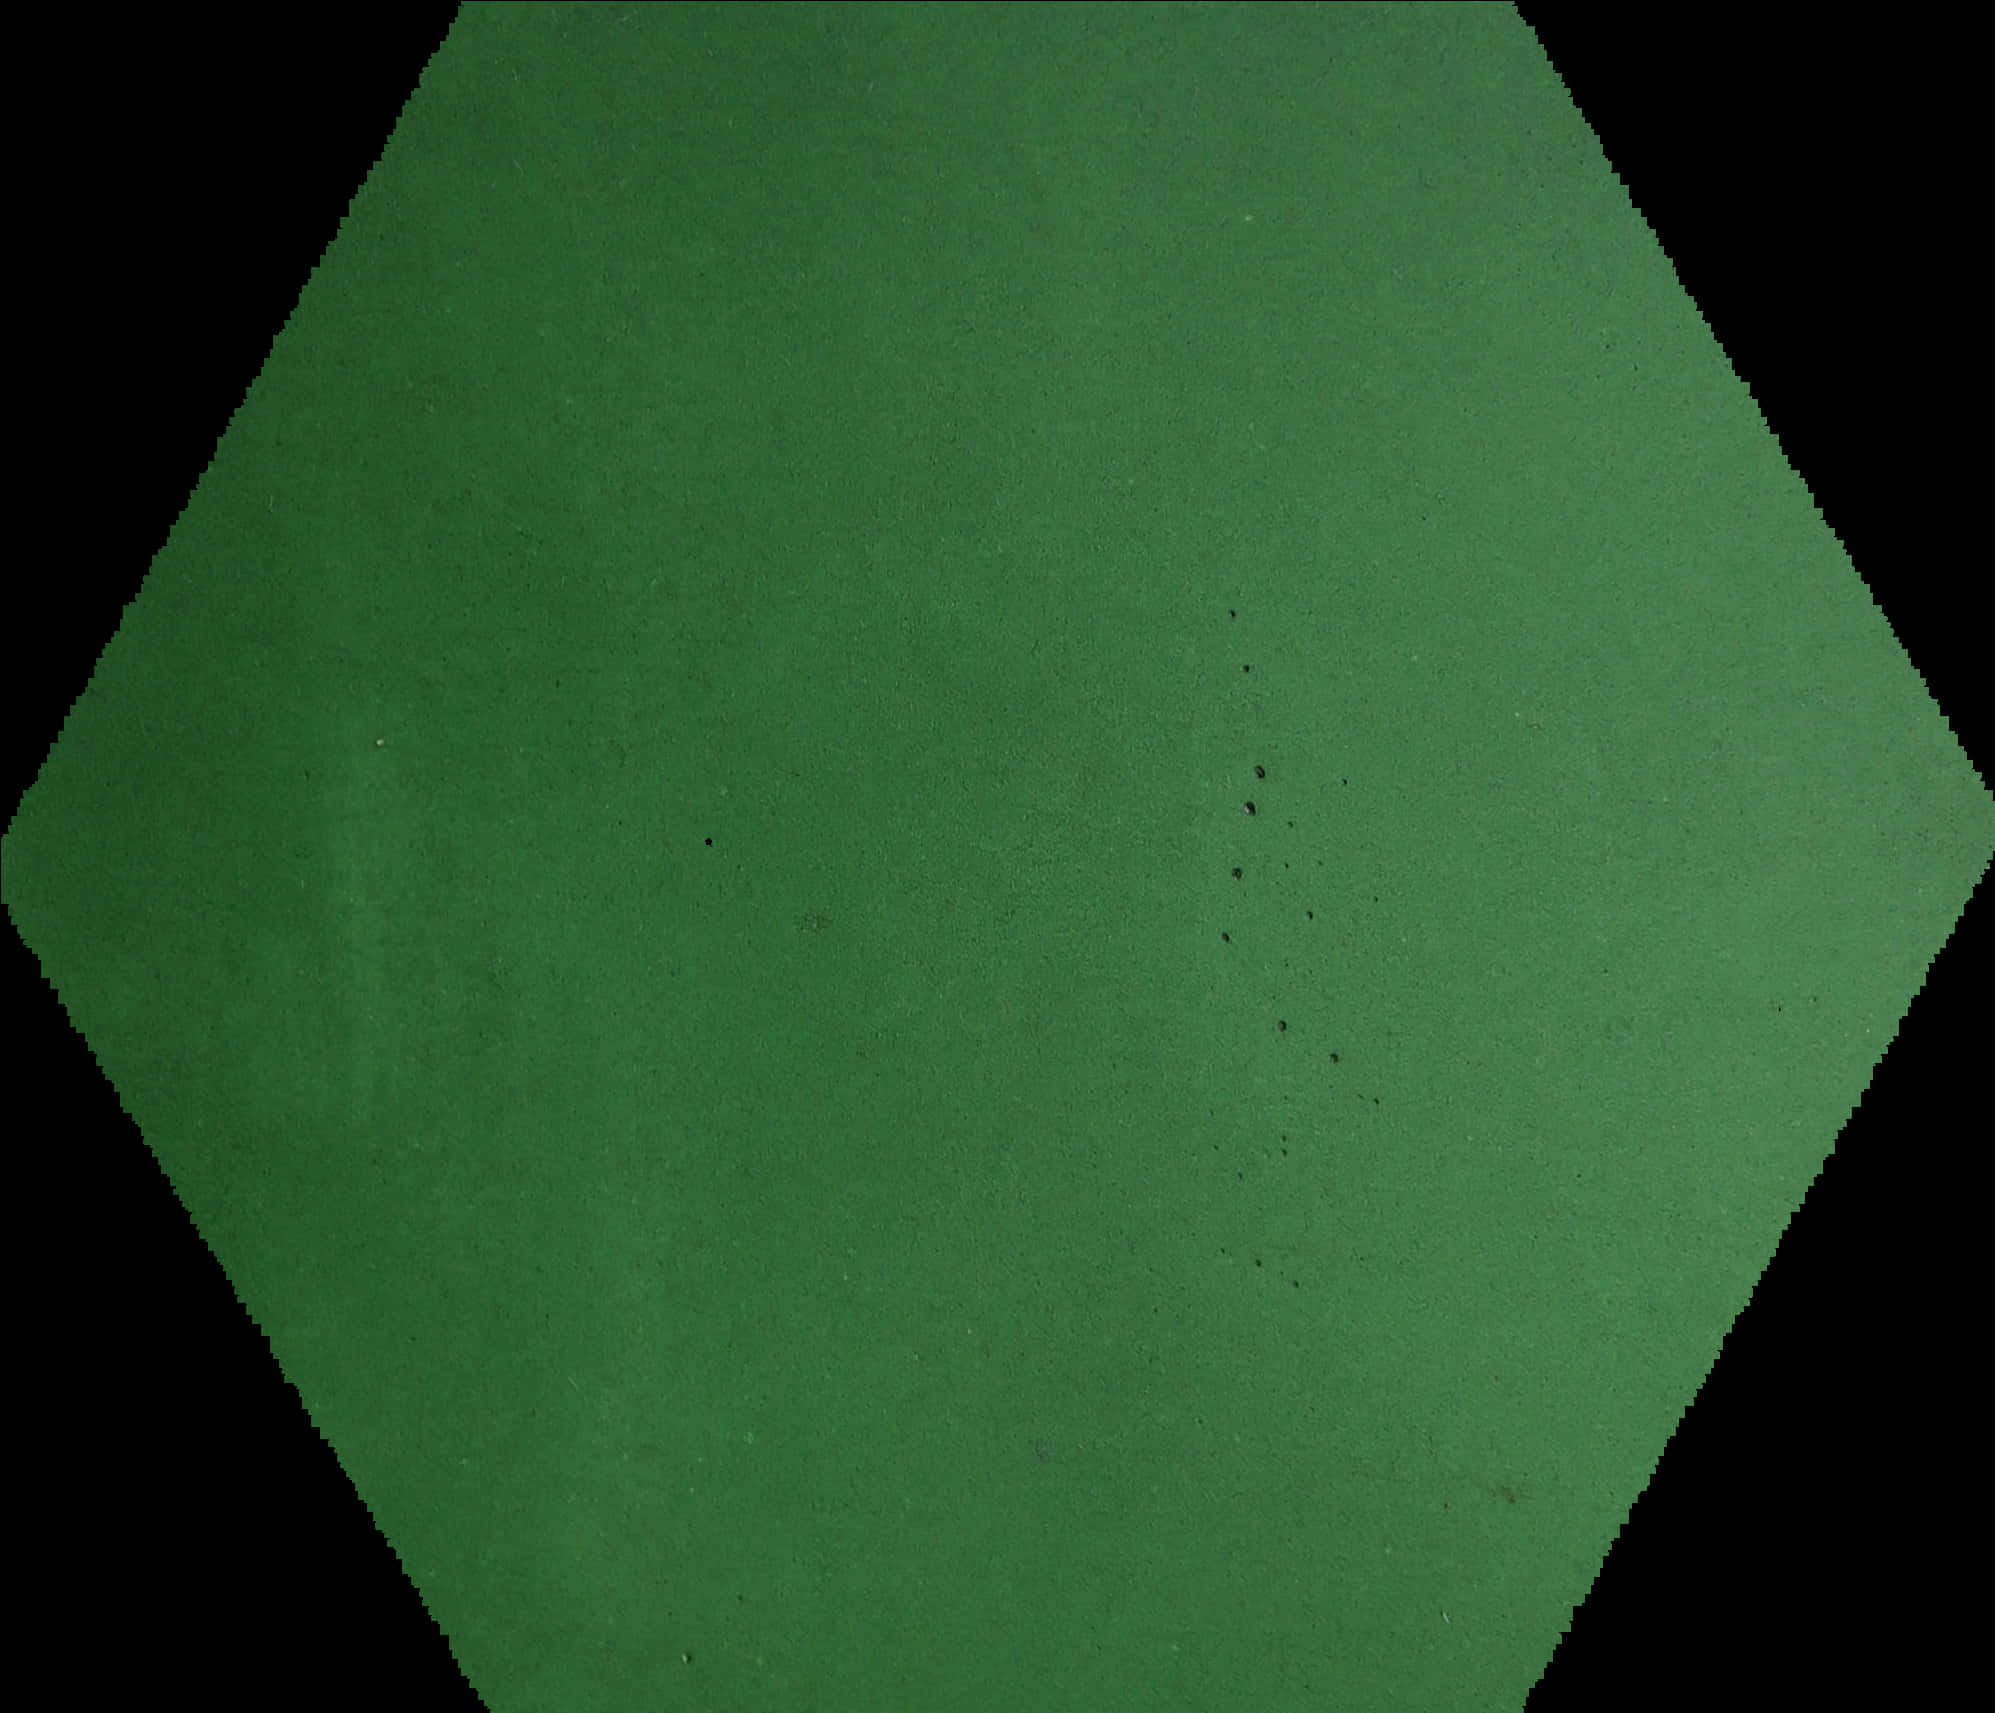 A Green Hexagon With Black Border PNG